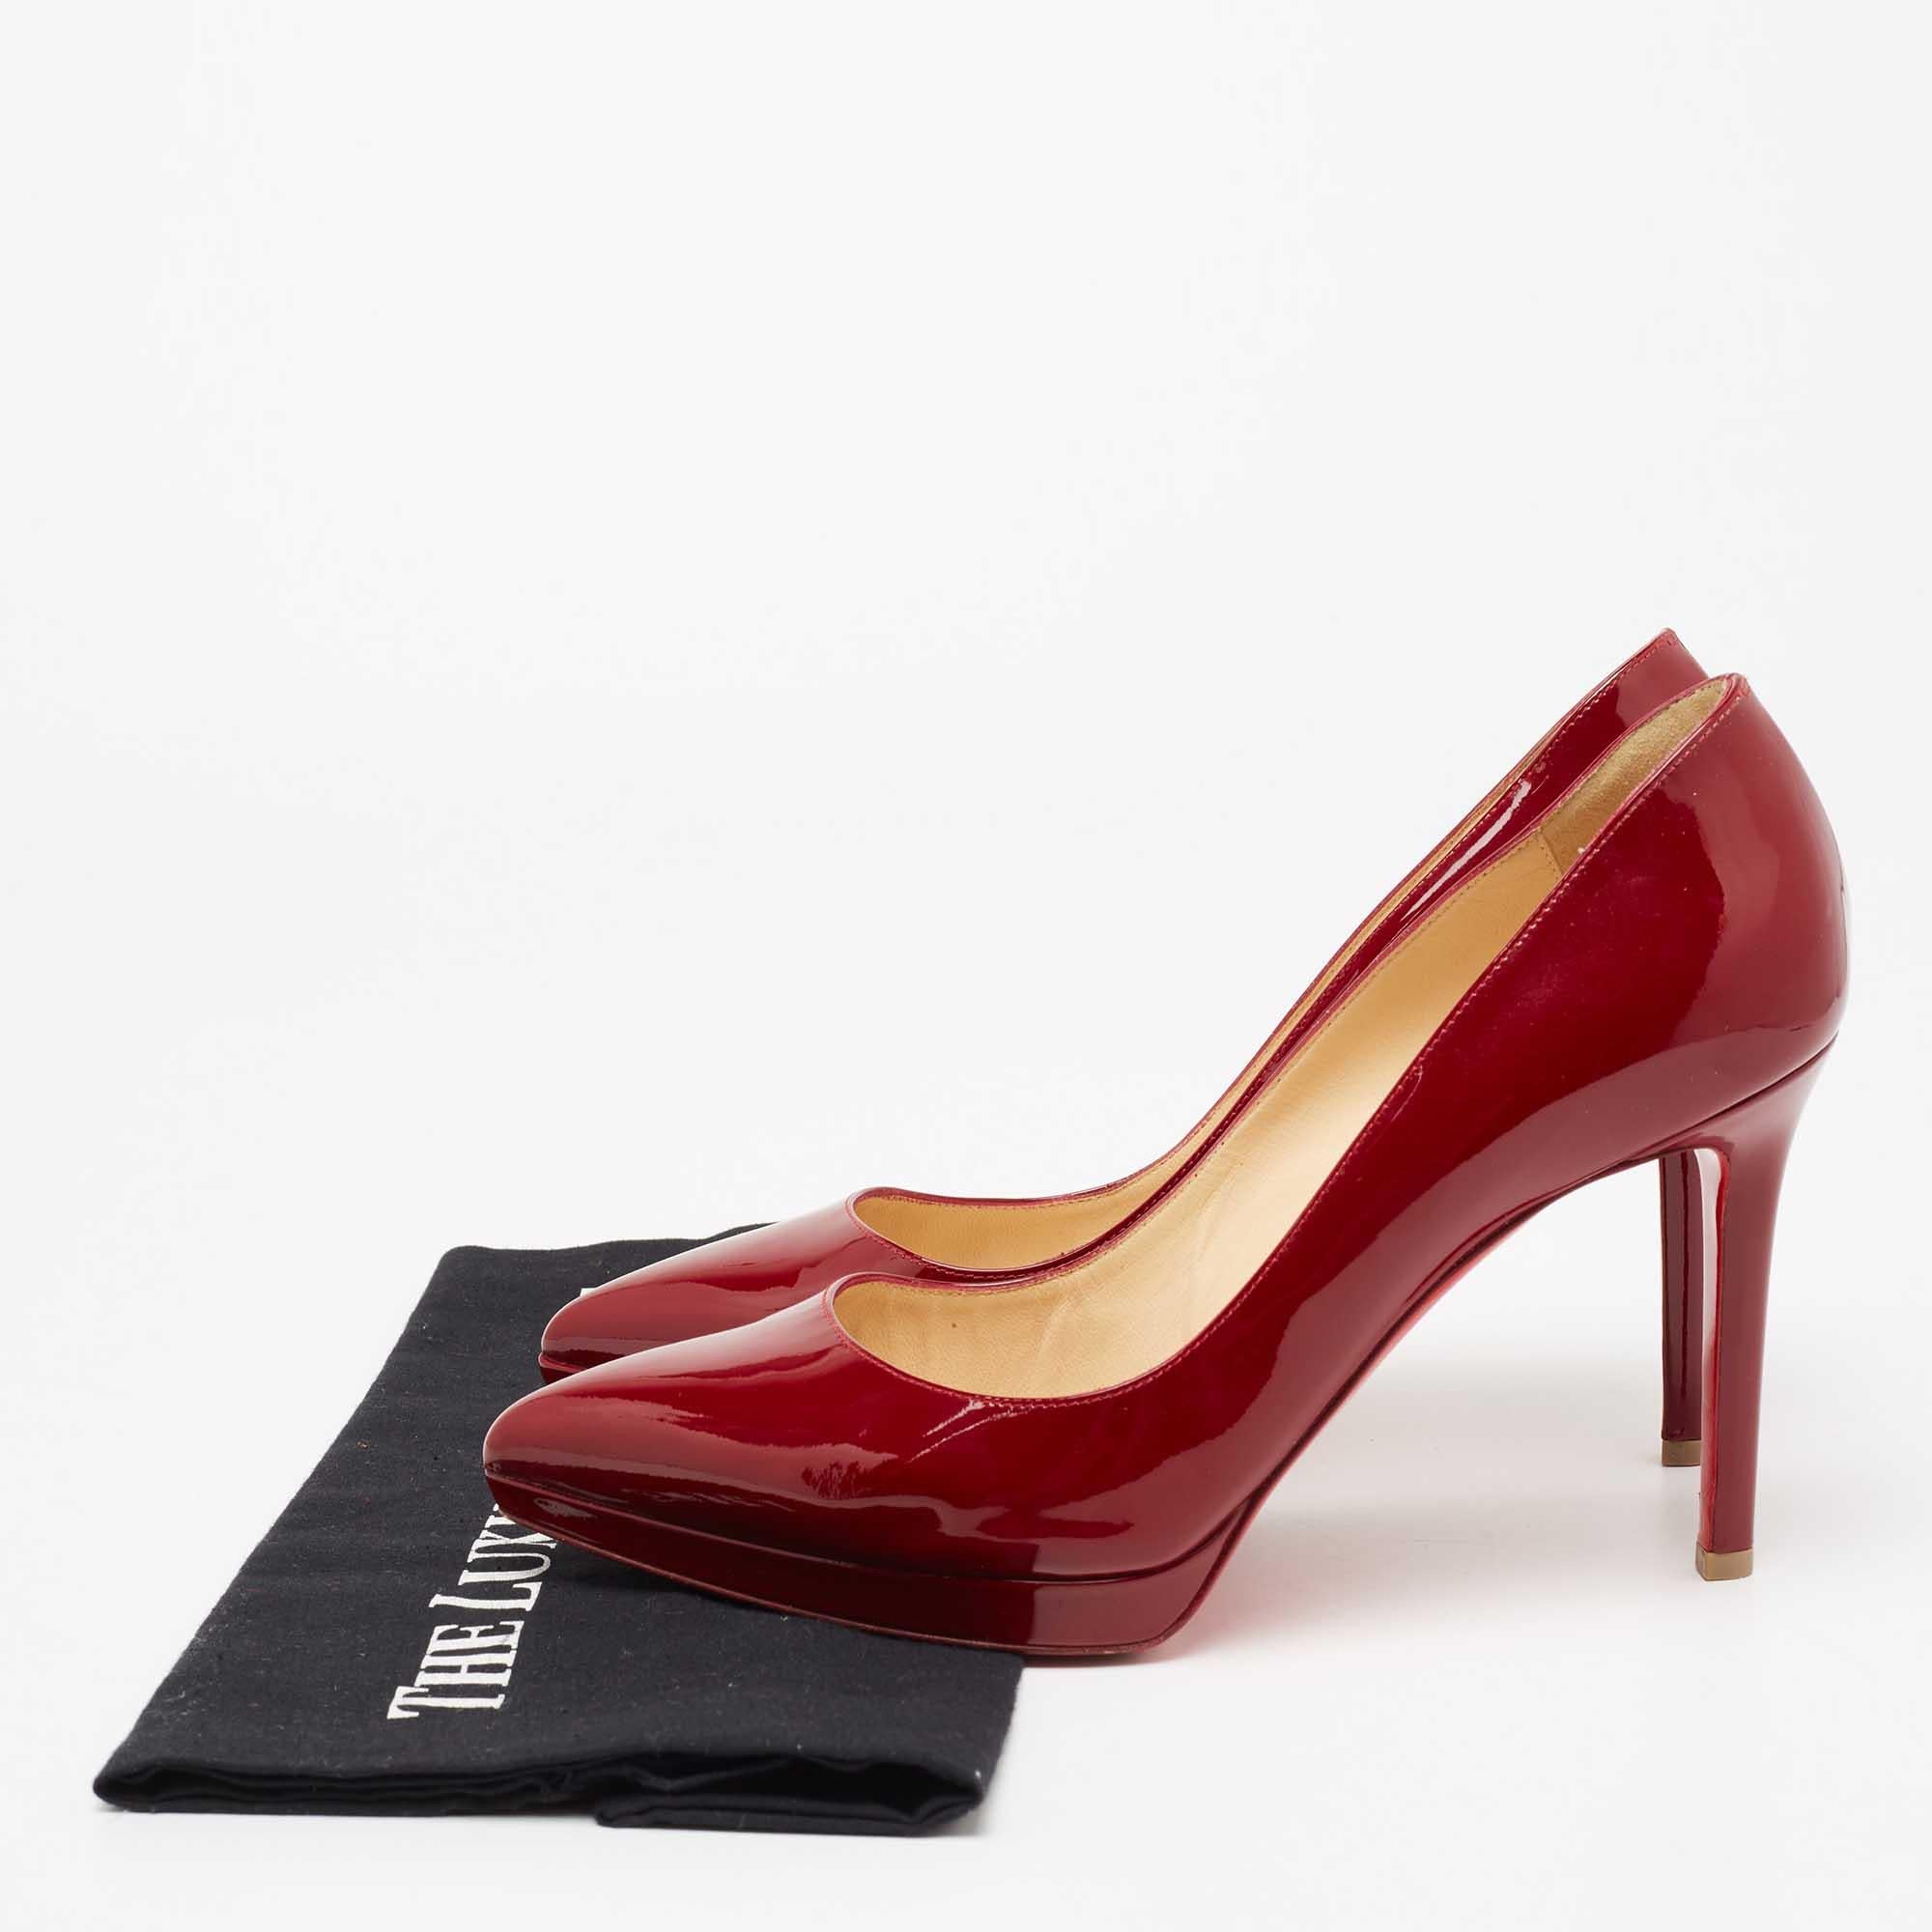 Christian Louboutin Burgundy Patent Leather Pigalle Plato Pumps Size 39 5